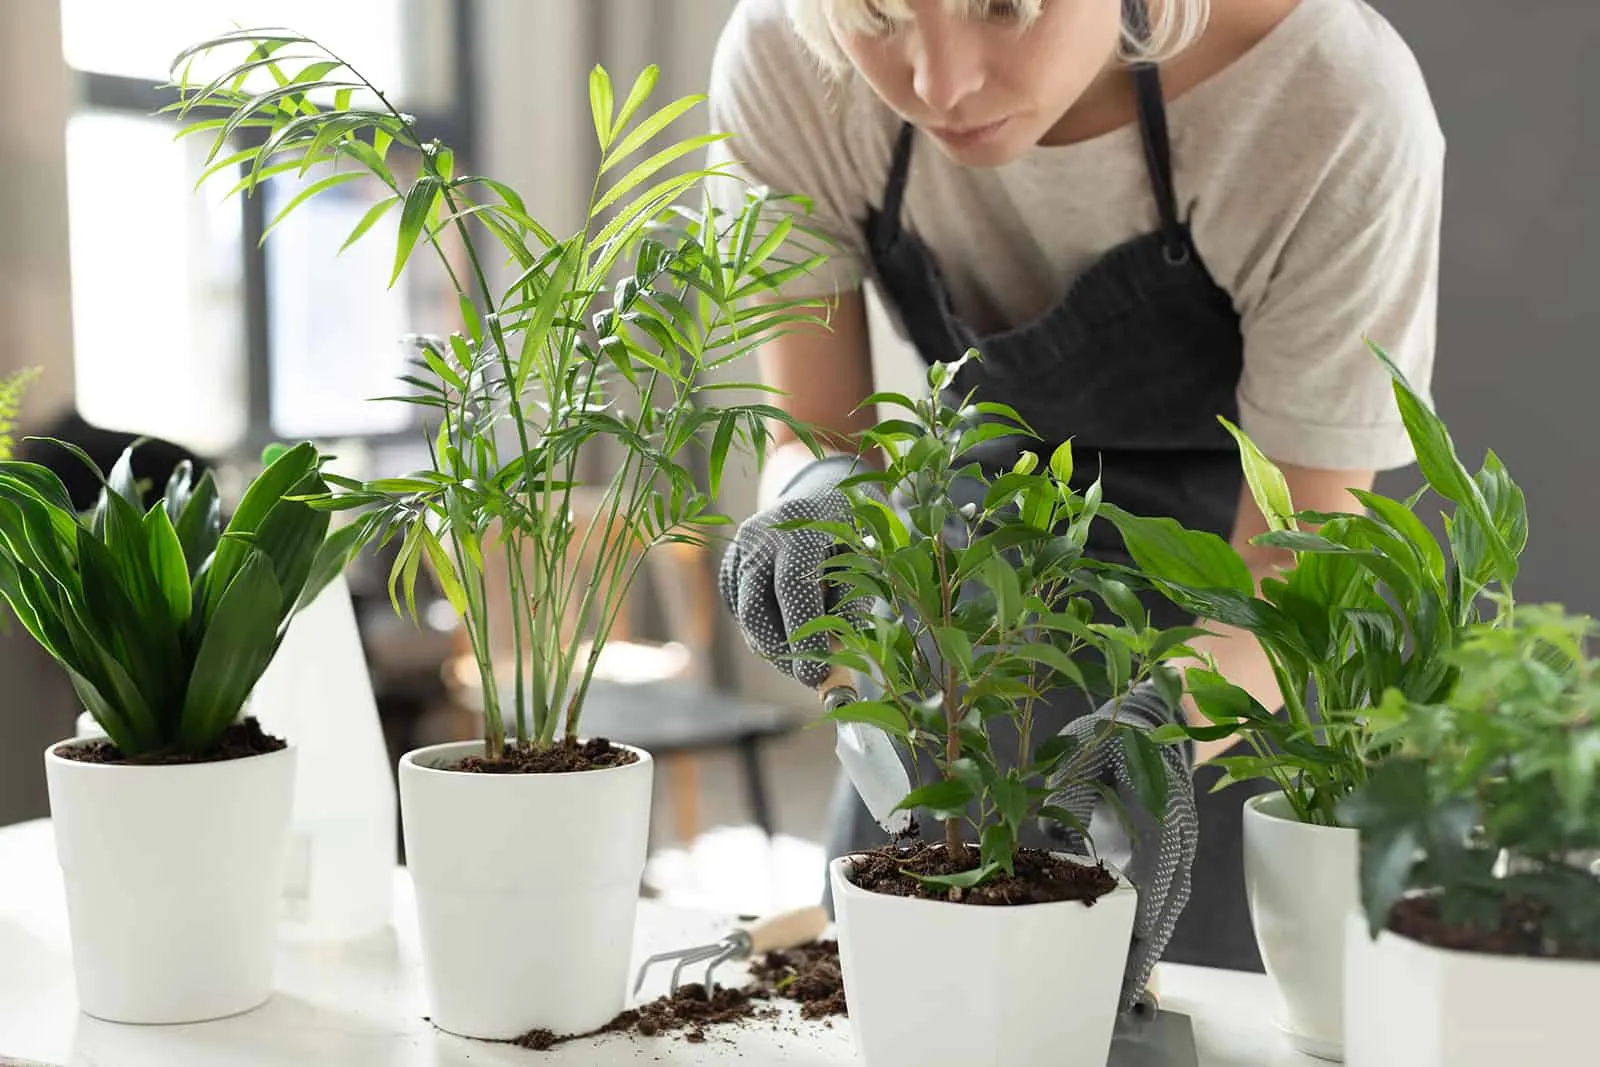 concentrated woman observing plants indoor